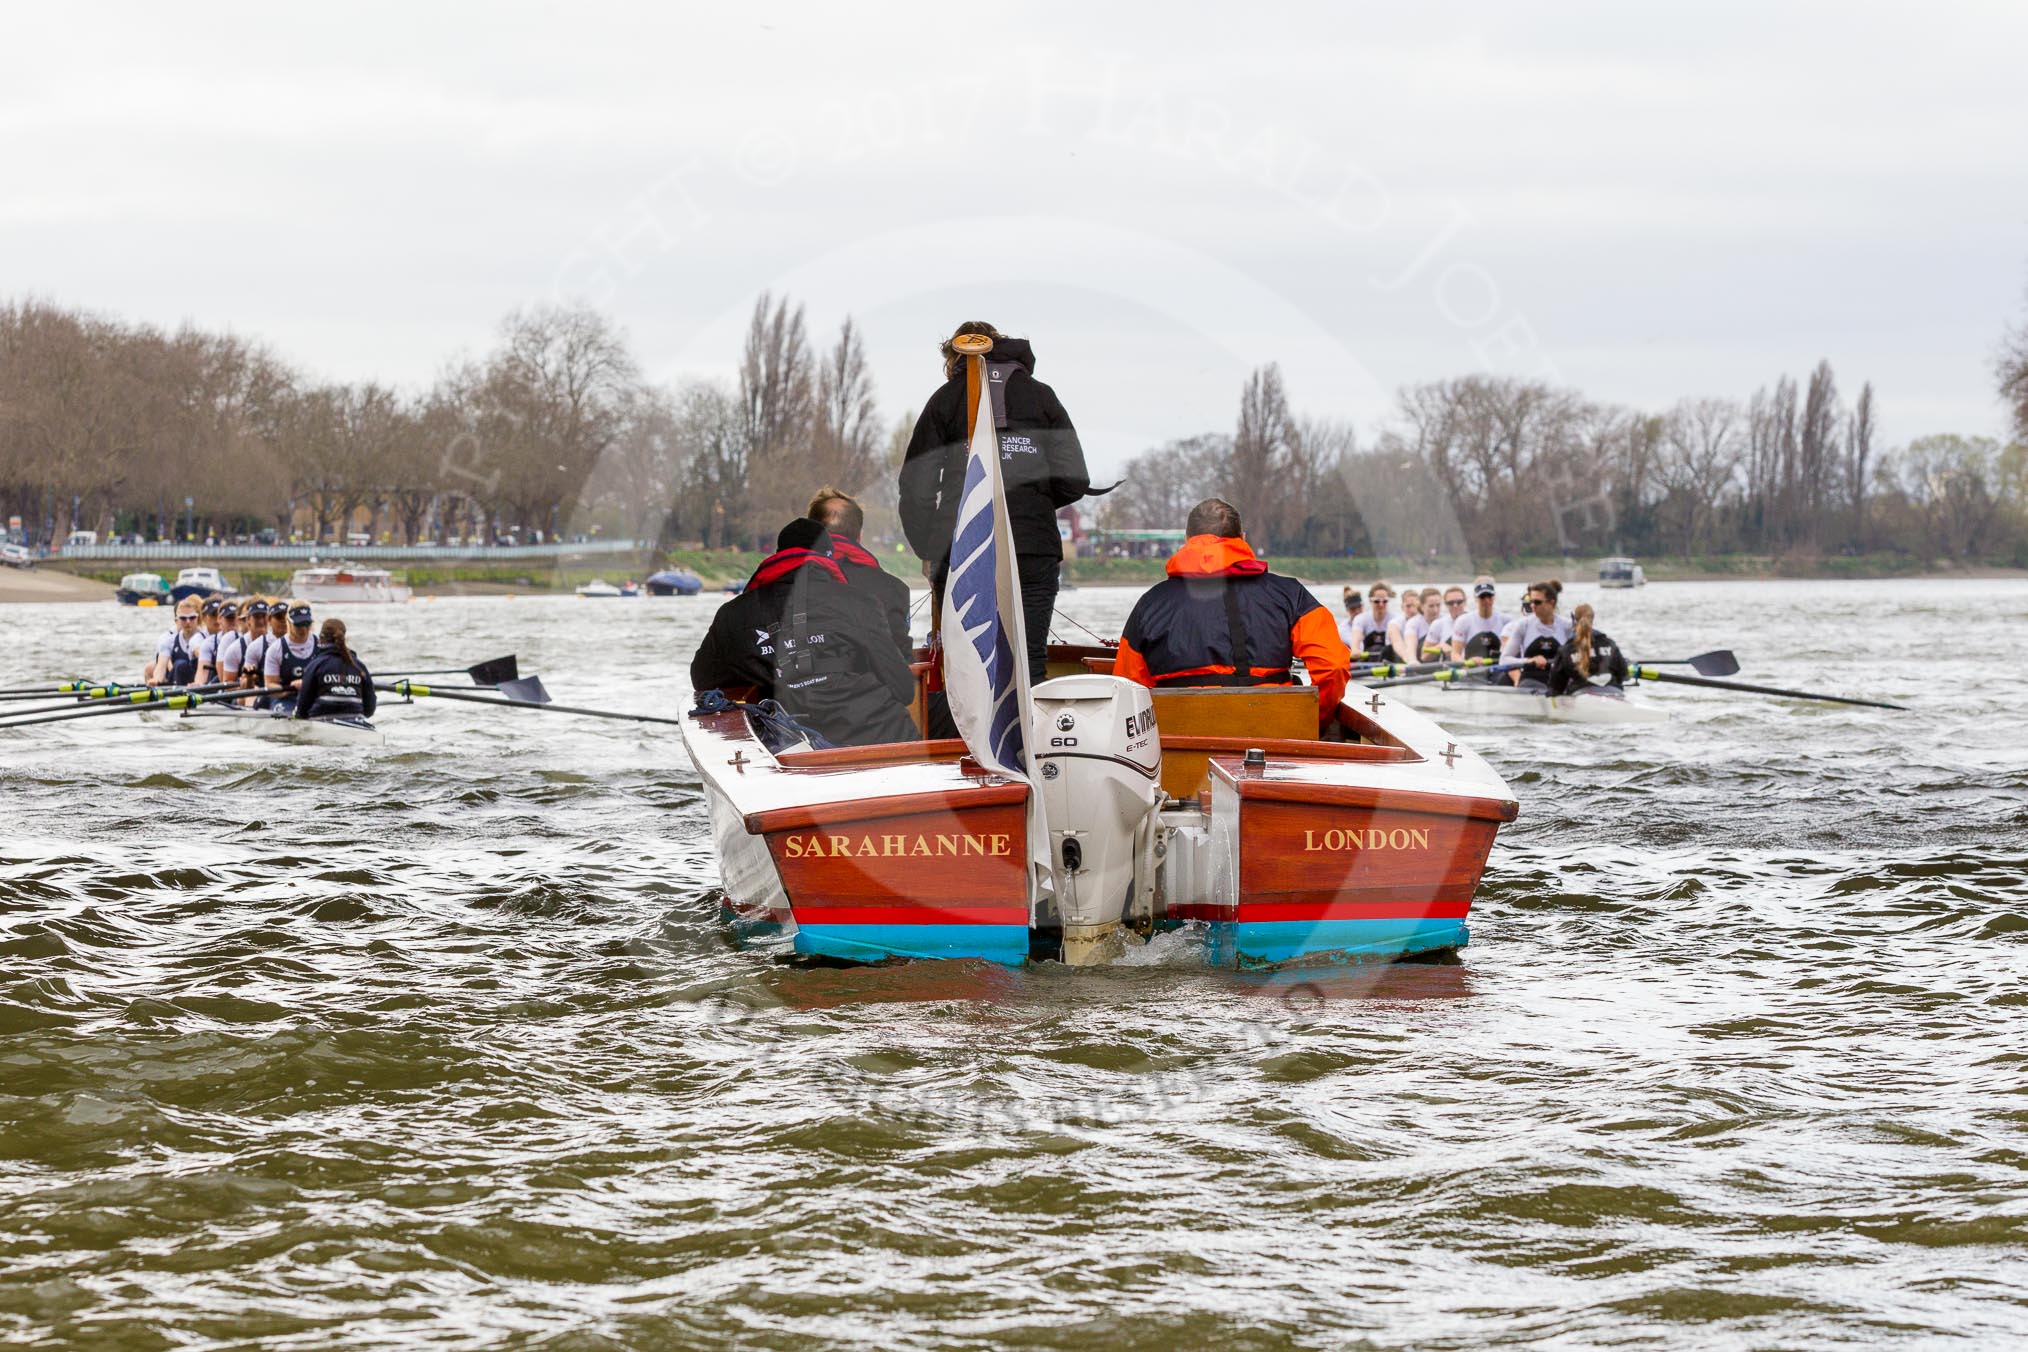 The Cancer Research UK Boat Race season 2017 - Women's Boat Race Fixture OUWBC vs Molesey BC: Moments before the start of the fixture, with OUWBC on the Surrey- and Molesey on the Middlesex side in front of the umpire's launch.
River Thames between Putney Bridge and Mortlake,
London SW15,

United Kingdom,
on 19 March 2017 at 15:58, image #40